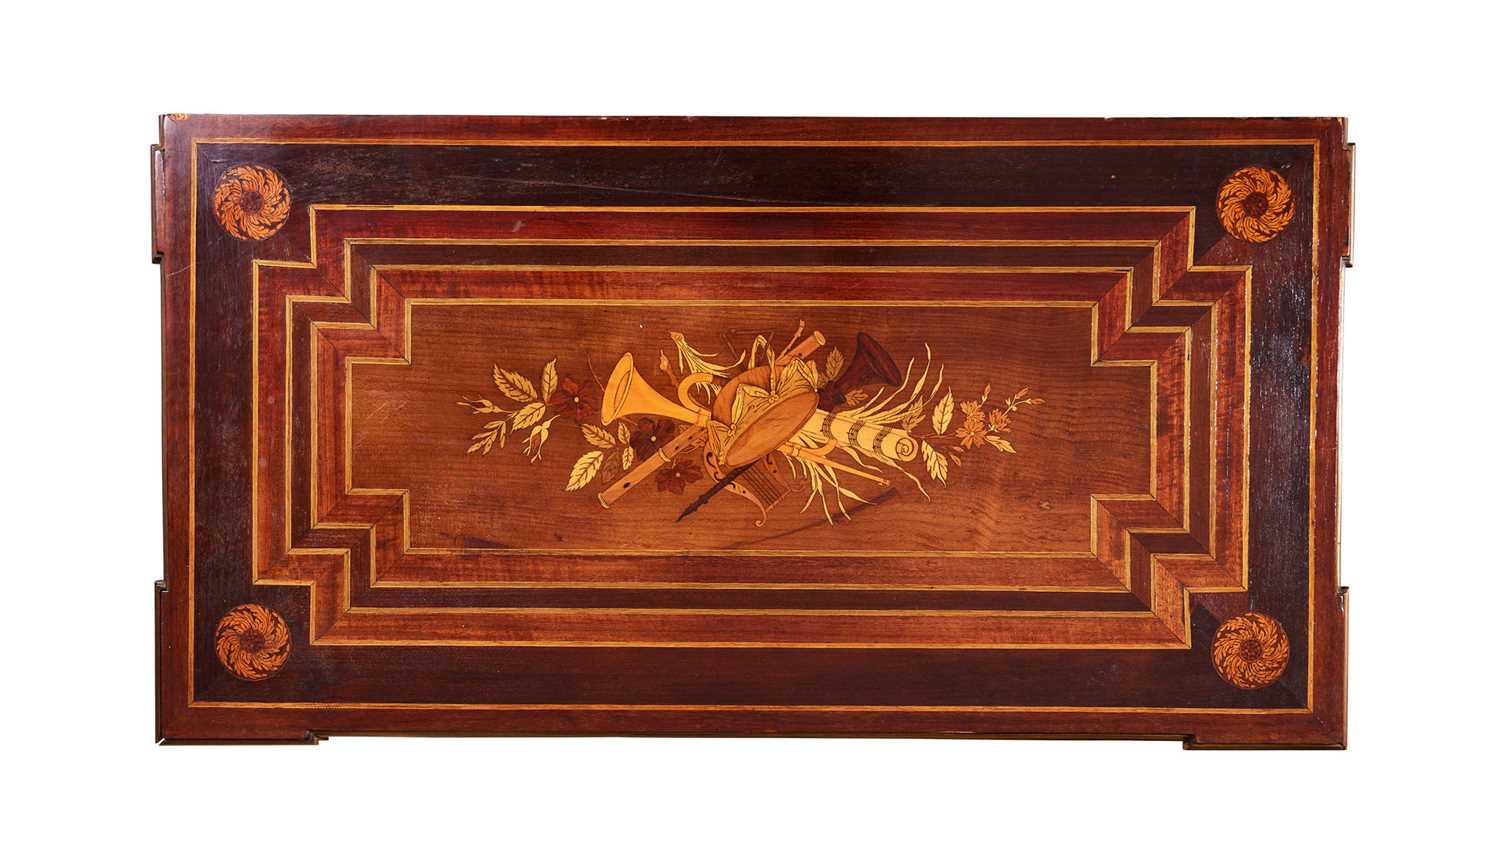 A 19TH CENTURY FRENCH HARDSTONE INLAID, ORMOLU MOUNTED AND MARQUETRY GAMES TABLE - Image 2 of 4